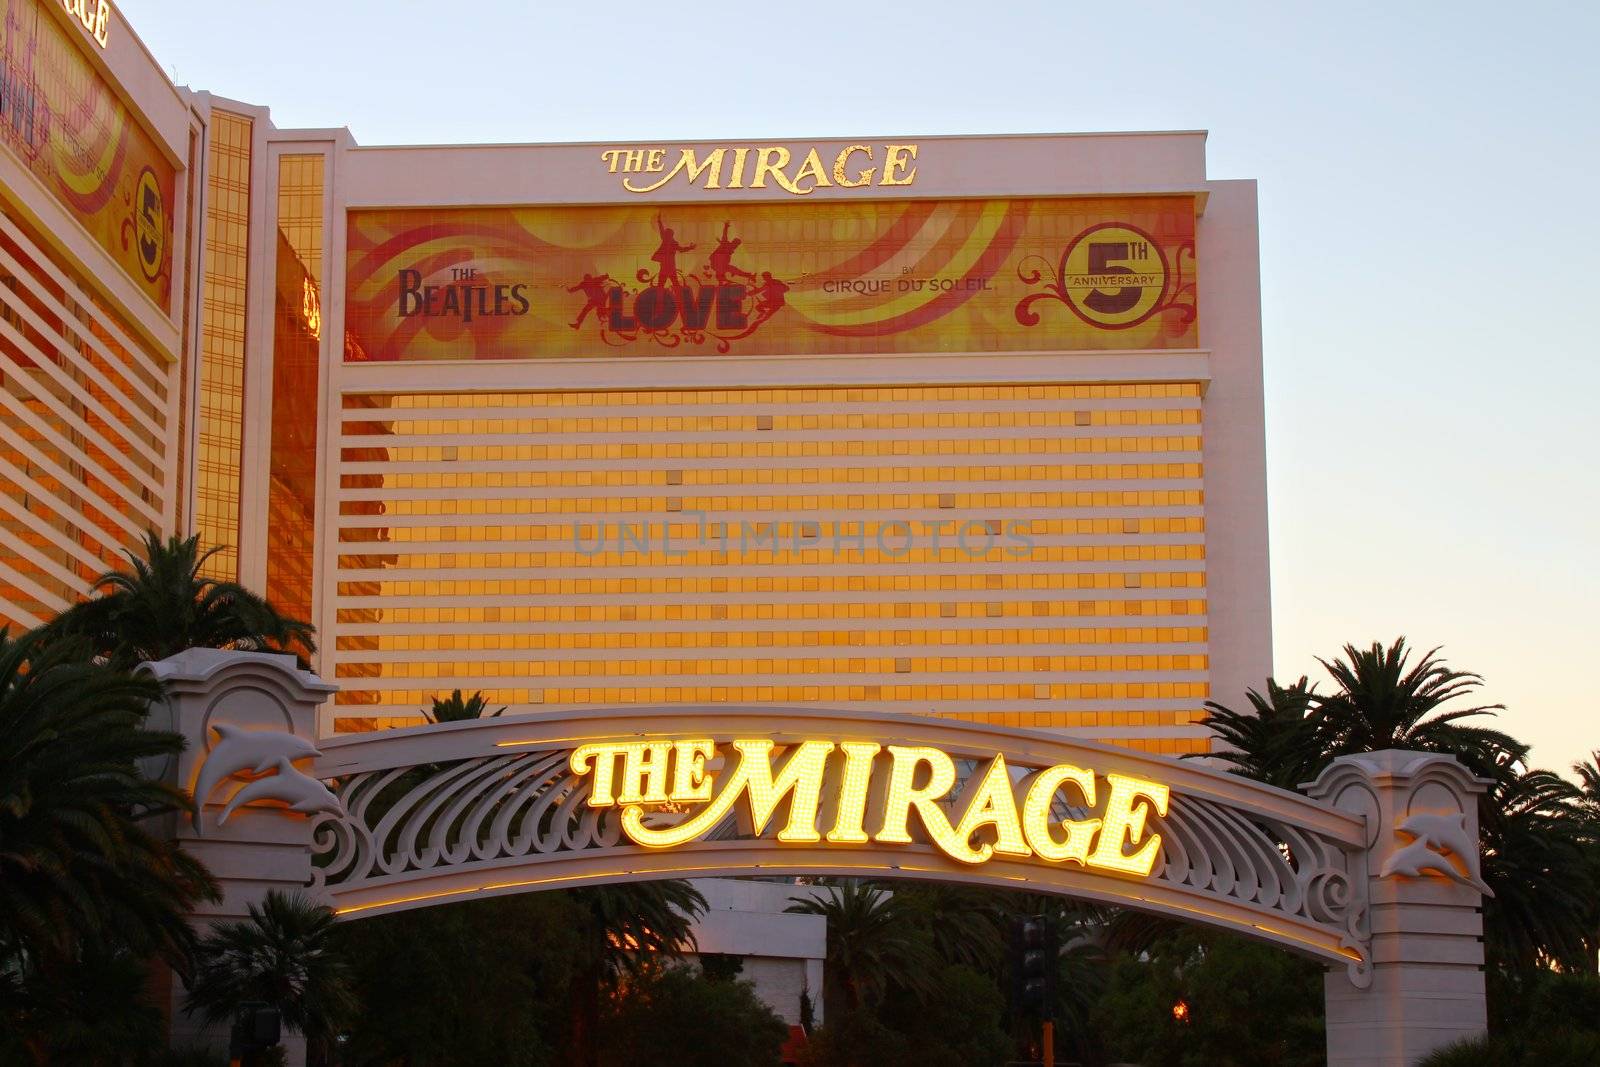 Las Vegas, USA - May 22, 2012: The Mirage hotel and casino in Las Vegas, Nevada.  The Mirage opened in 1989 and has over 3,000 hotel rooms available.